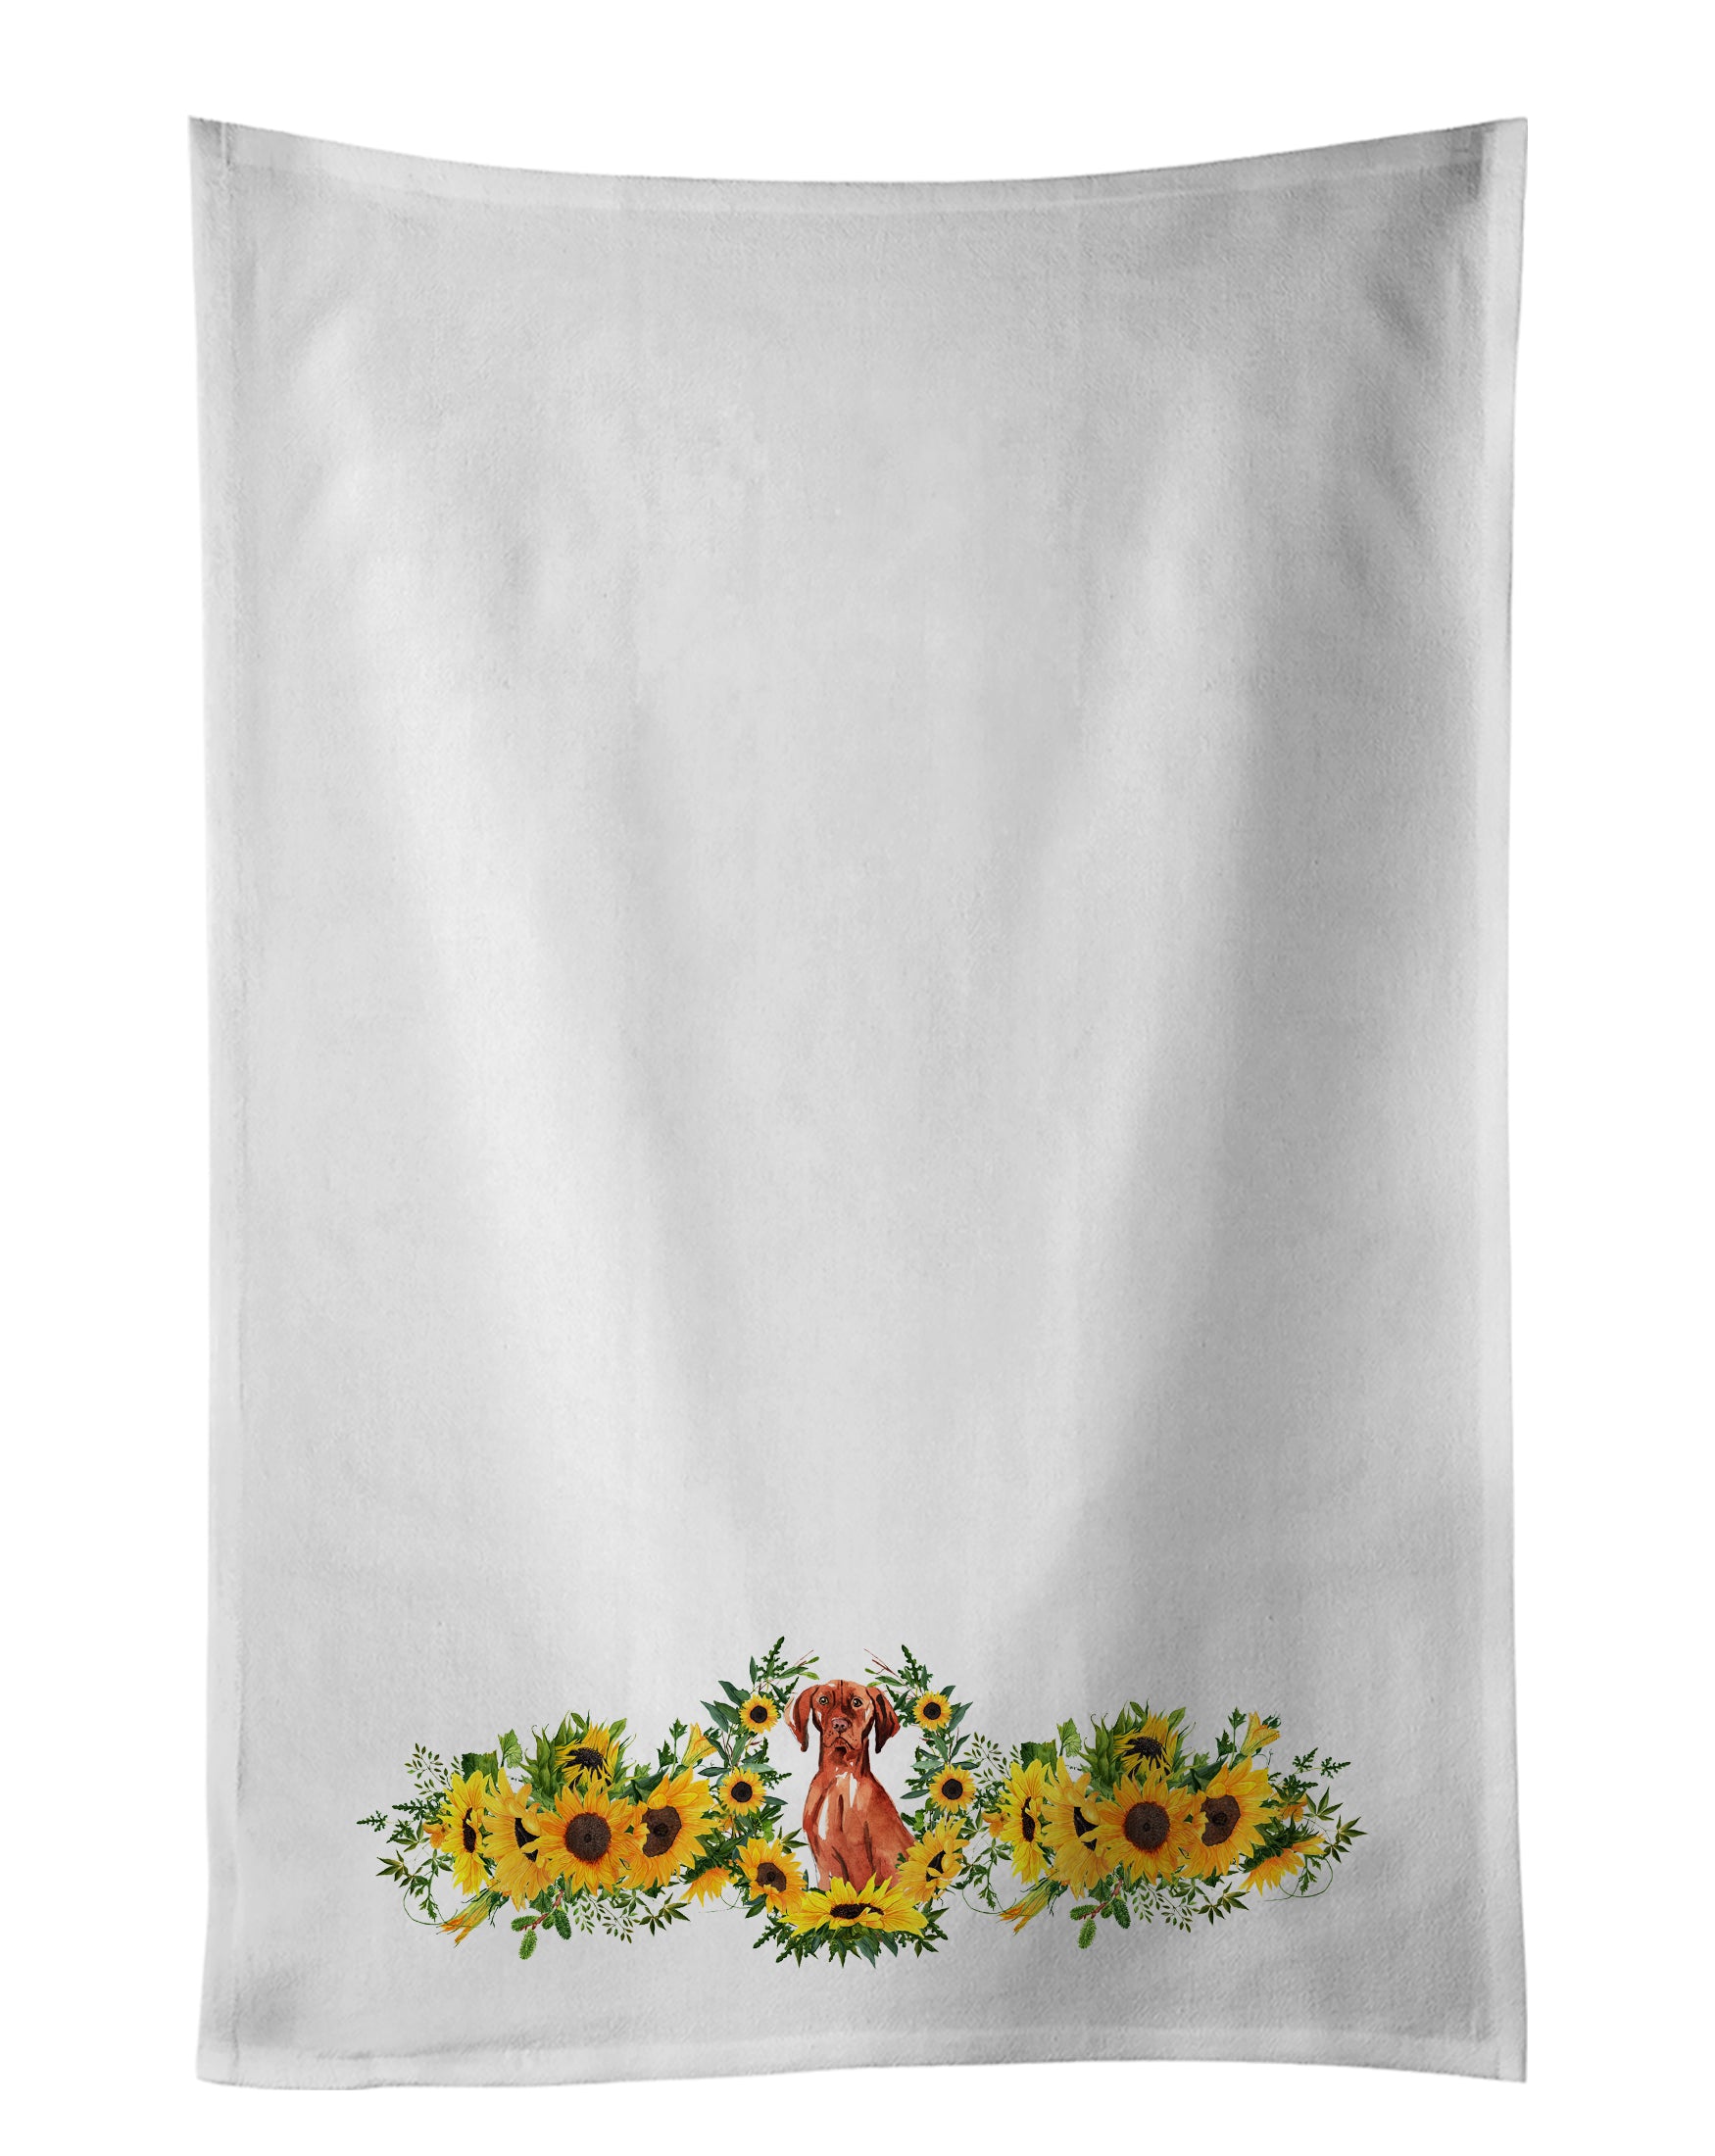 Buy this Vizsla in Sunflowers White Kitchen Towel Set of 2